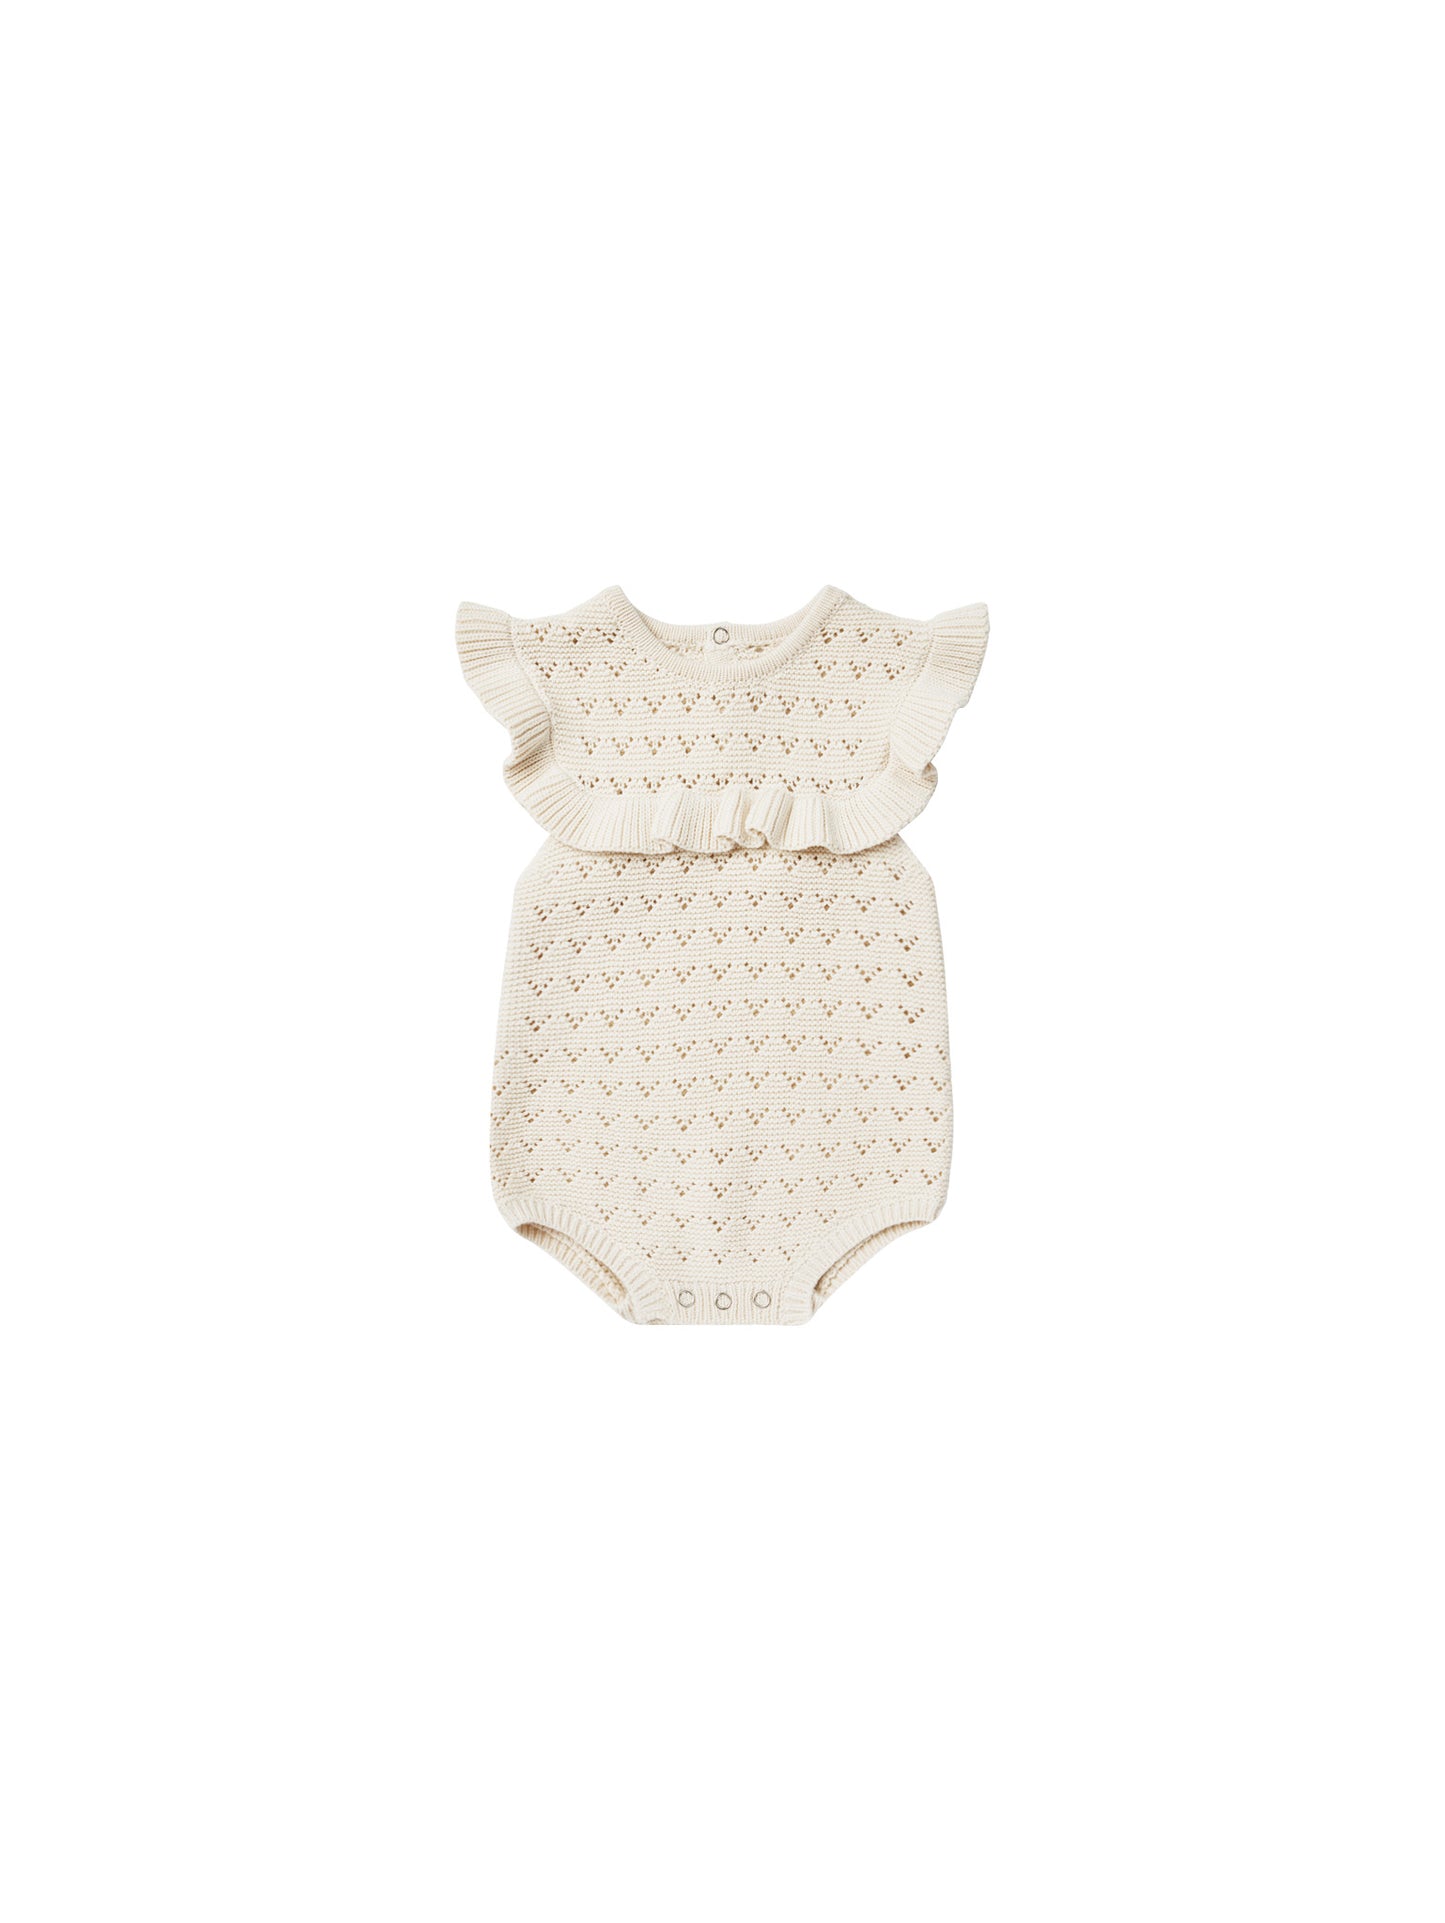 POINTELLE RUFFLE ROMPER || NATURAL